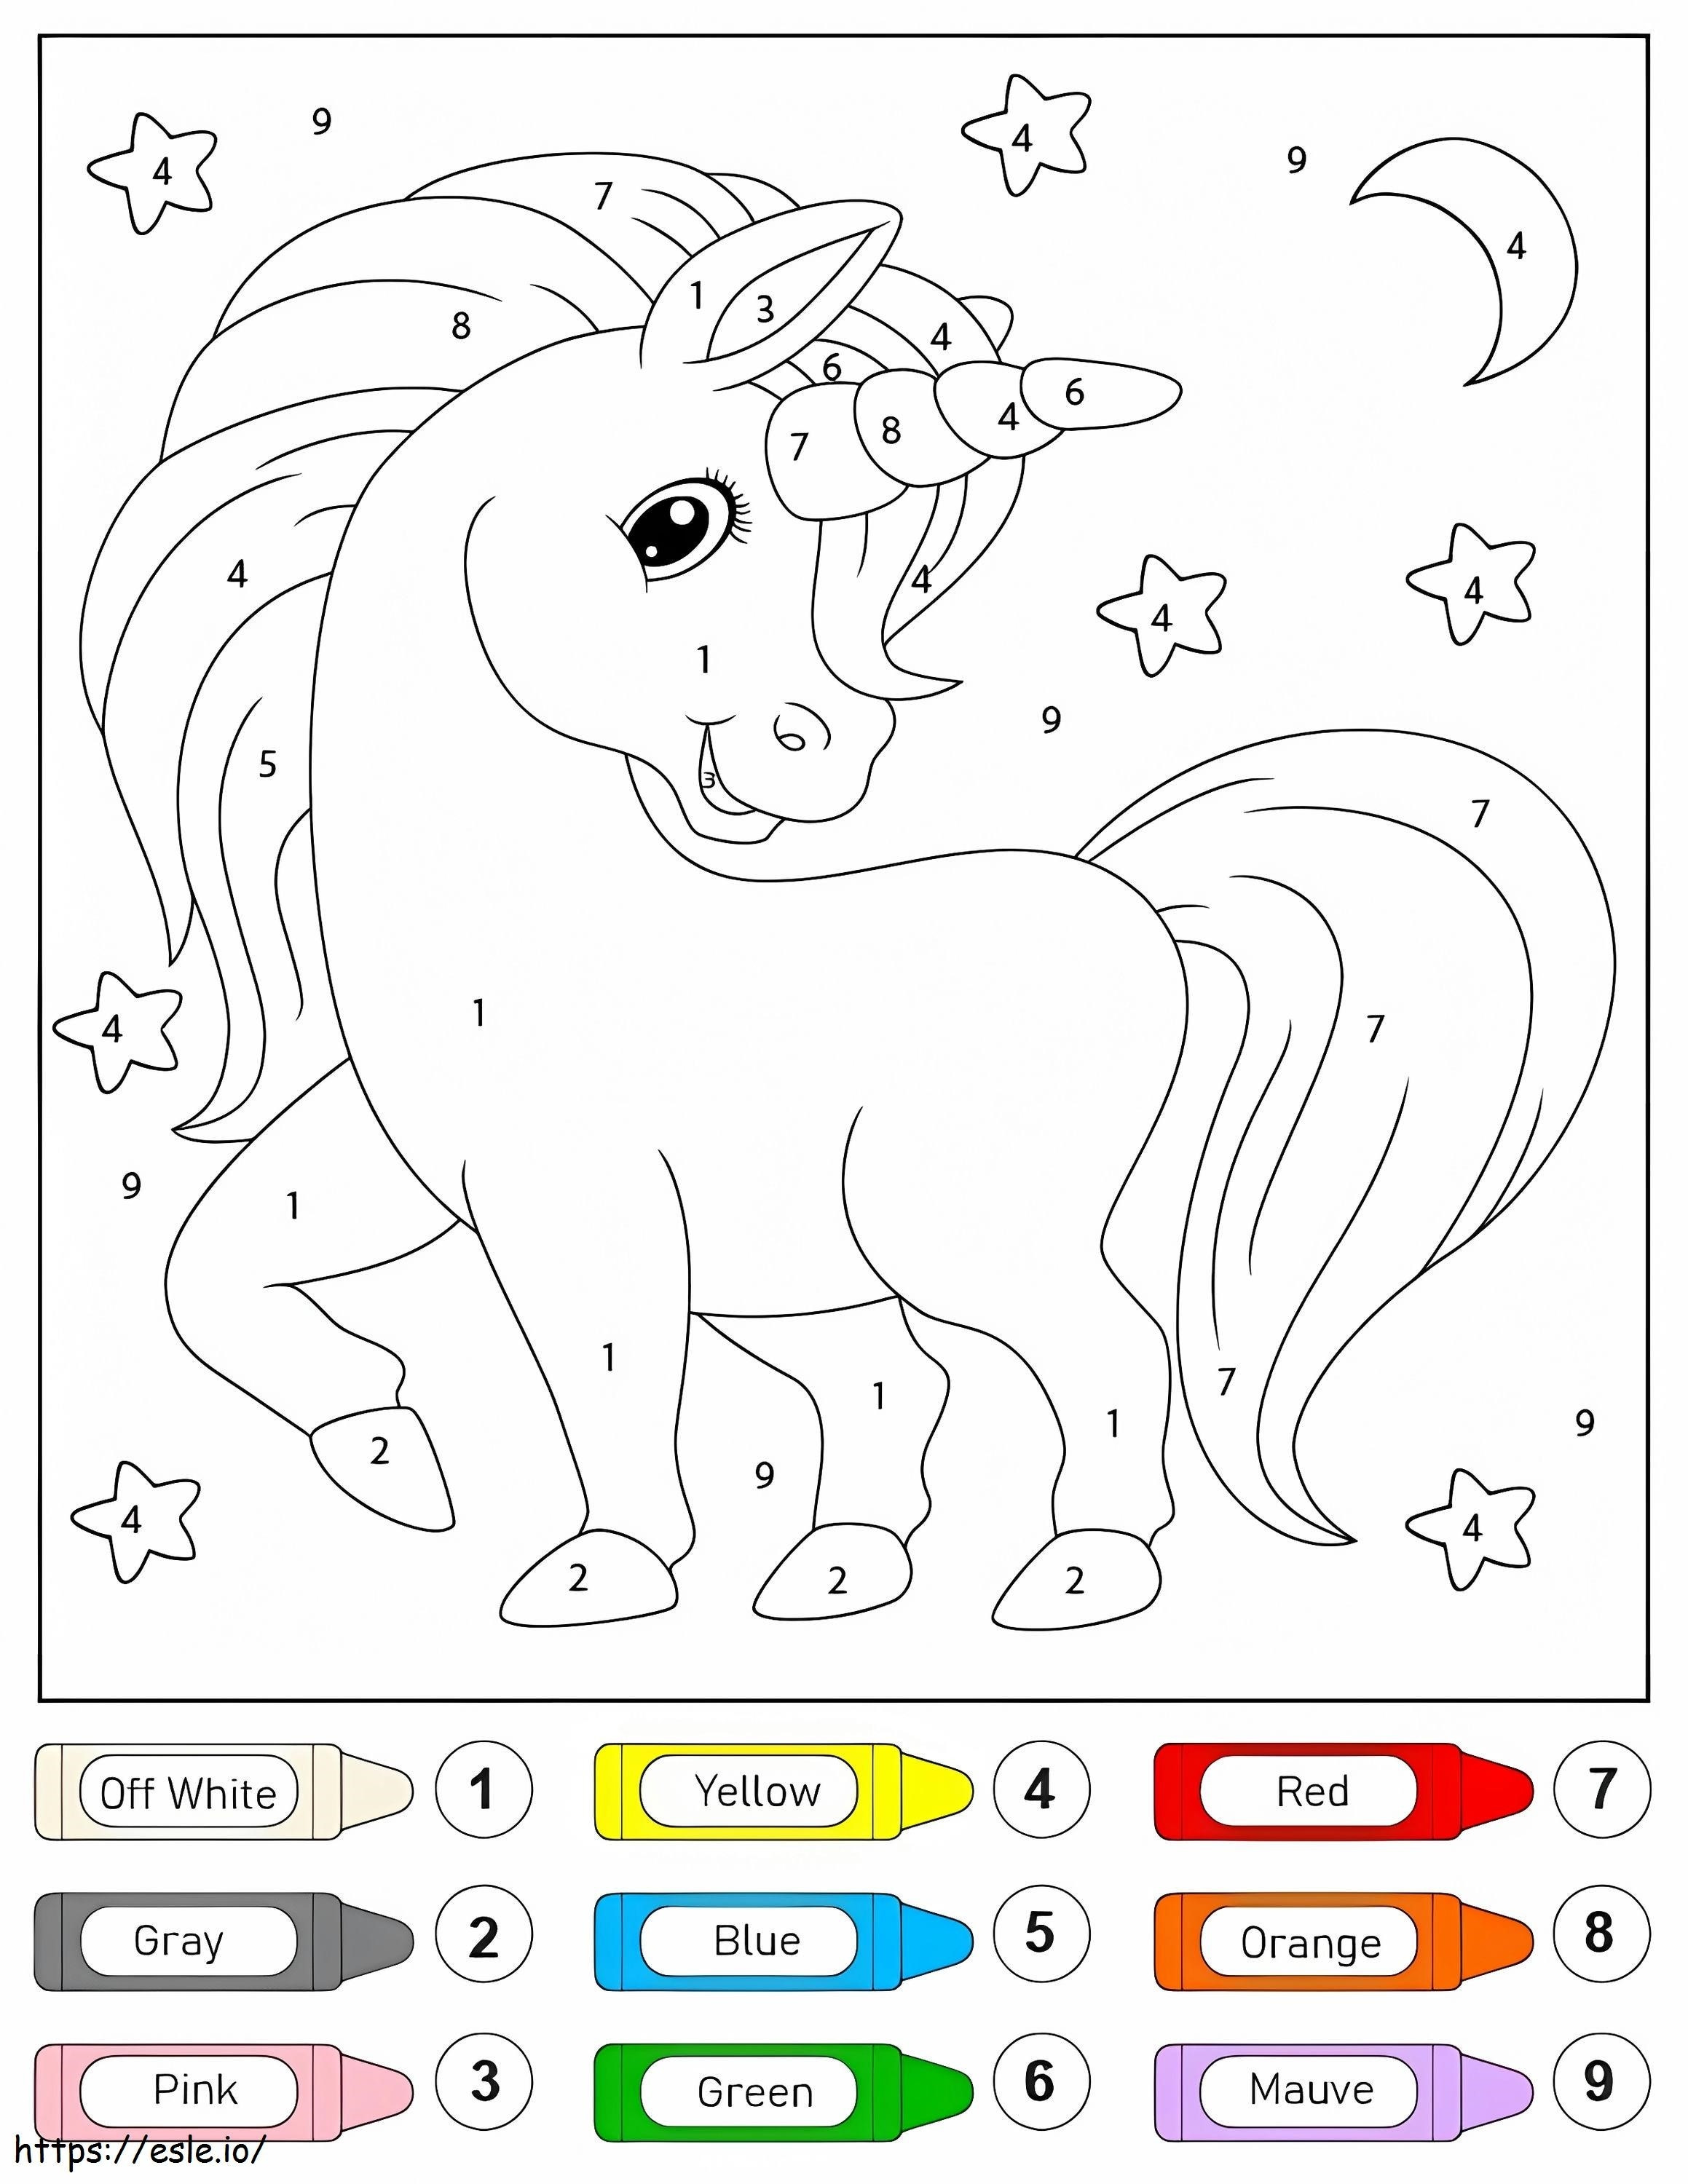 Stunning Unicorn Color By Number coloring page